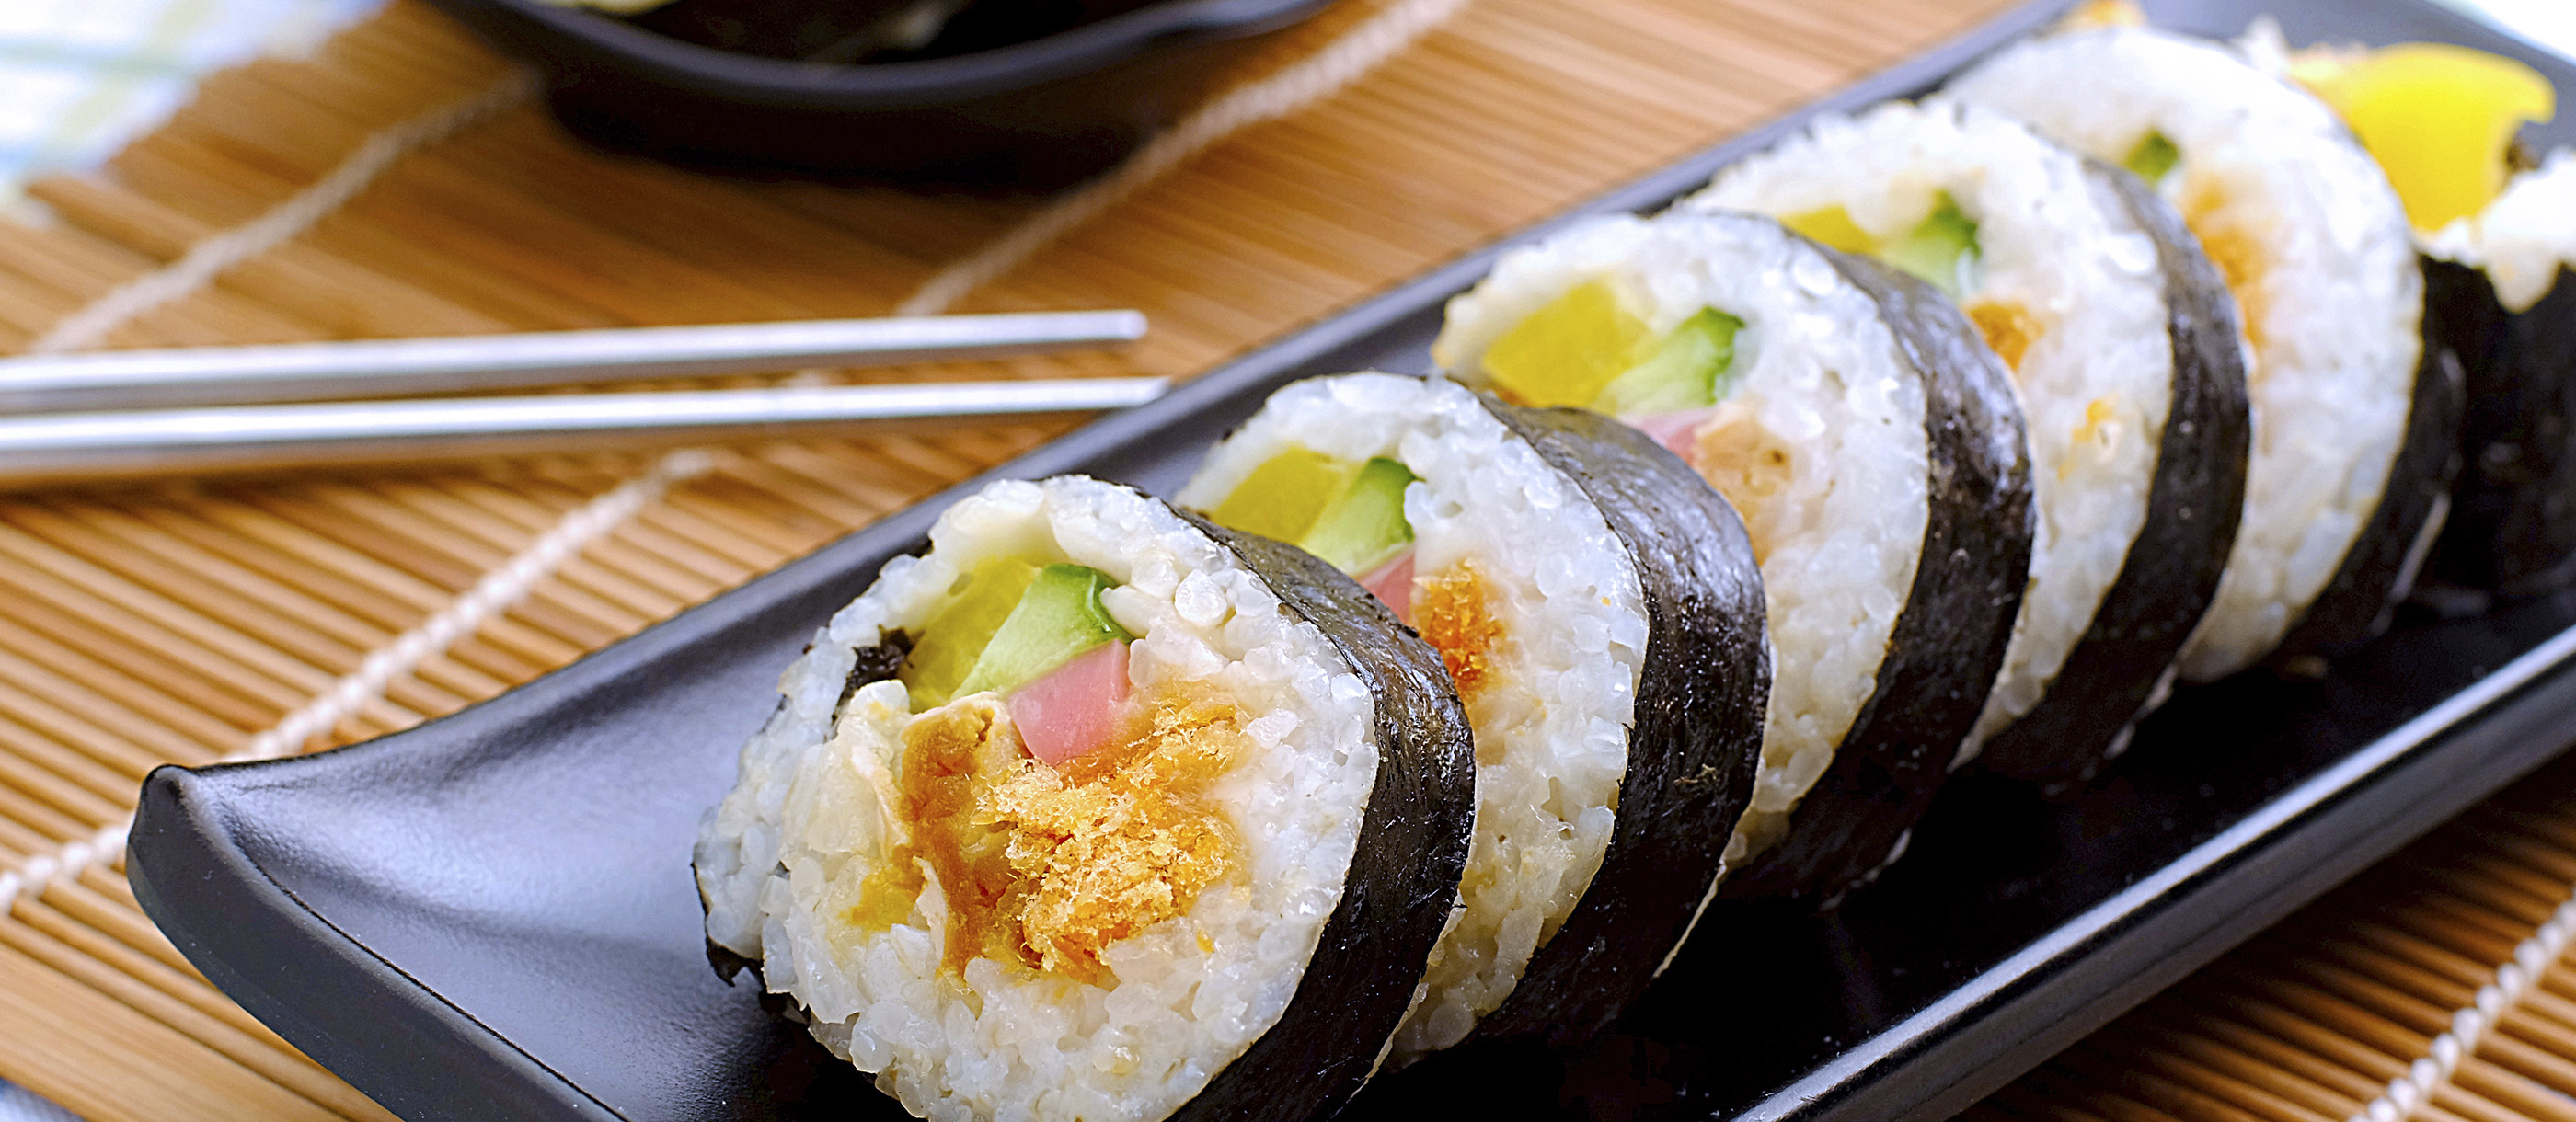 Kimbap Authentic Recipe | foods around the world you must try